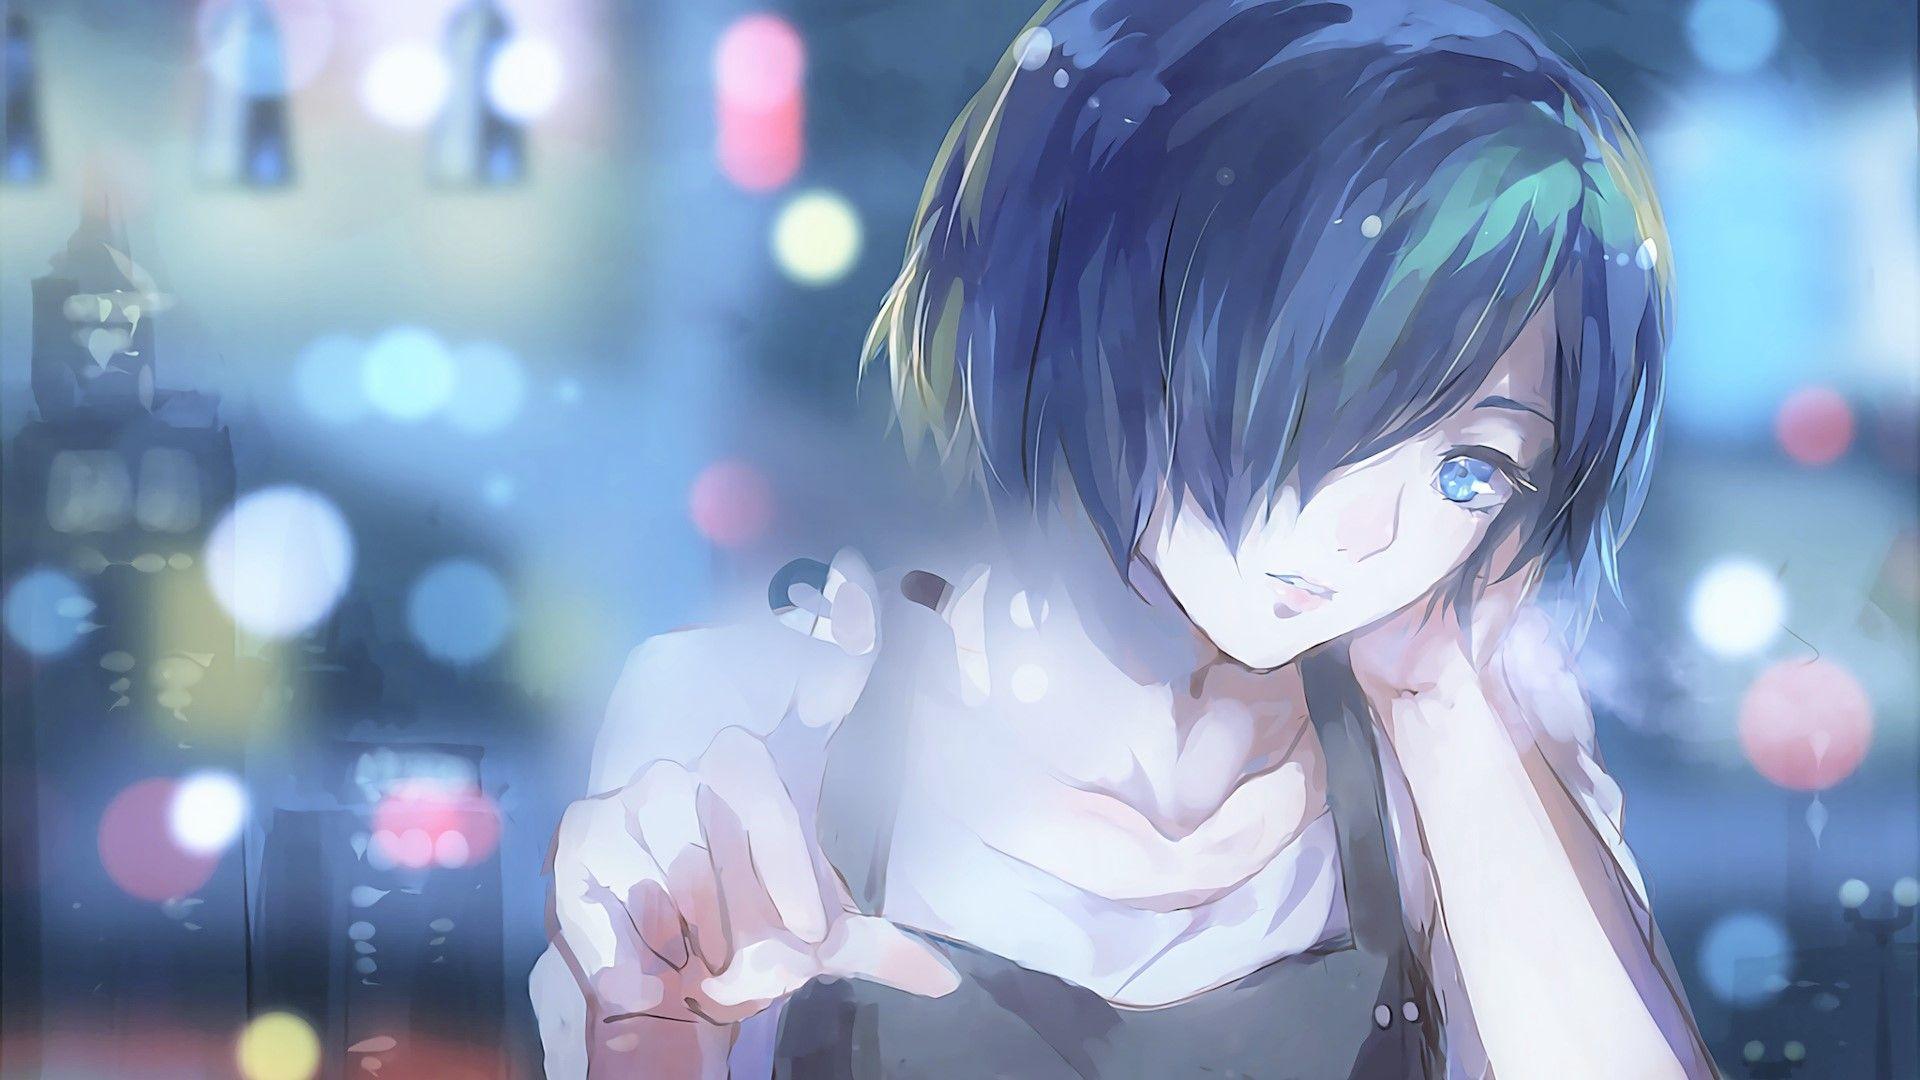 I wanted to share this Touka wallpaper which to my knowledge isn't